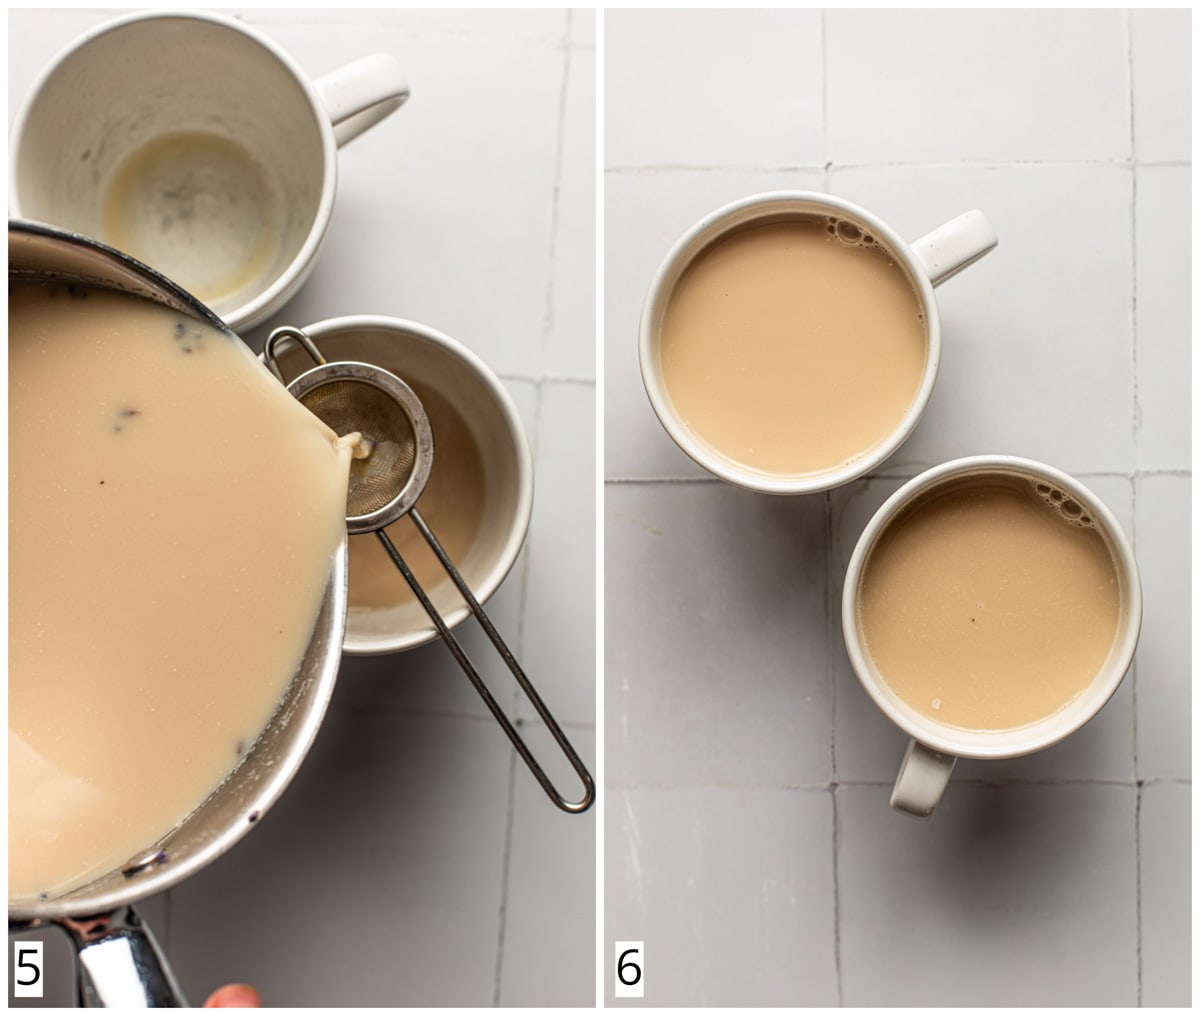 A collage of two images showing milk tea being poured into two mugs.